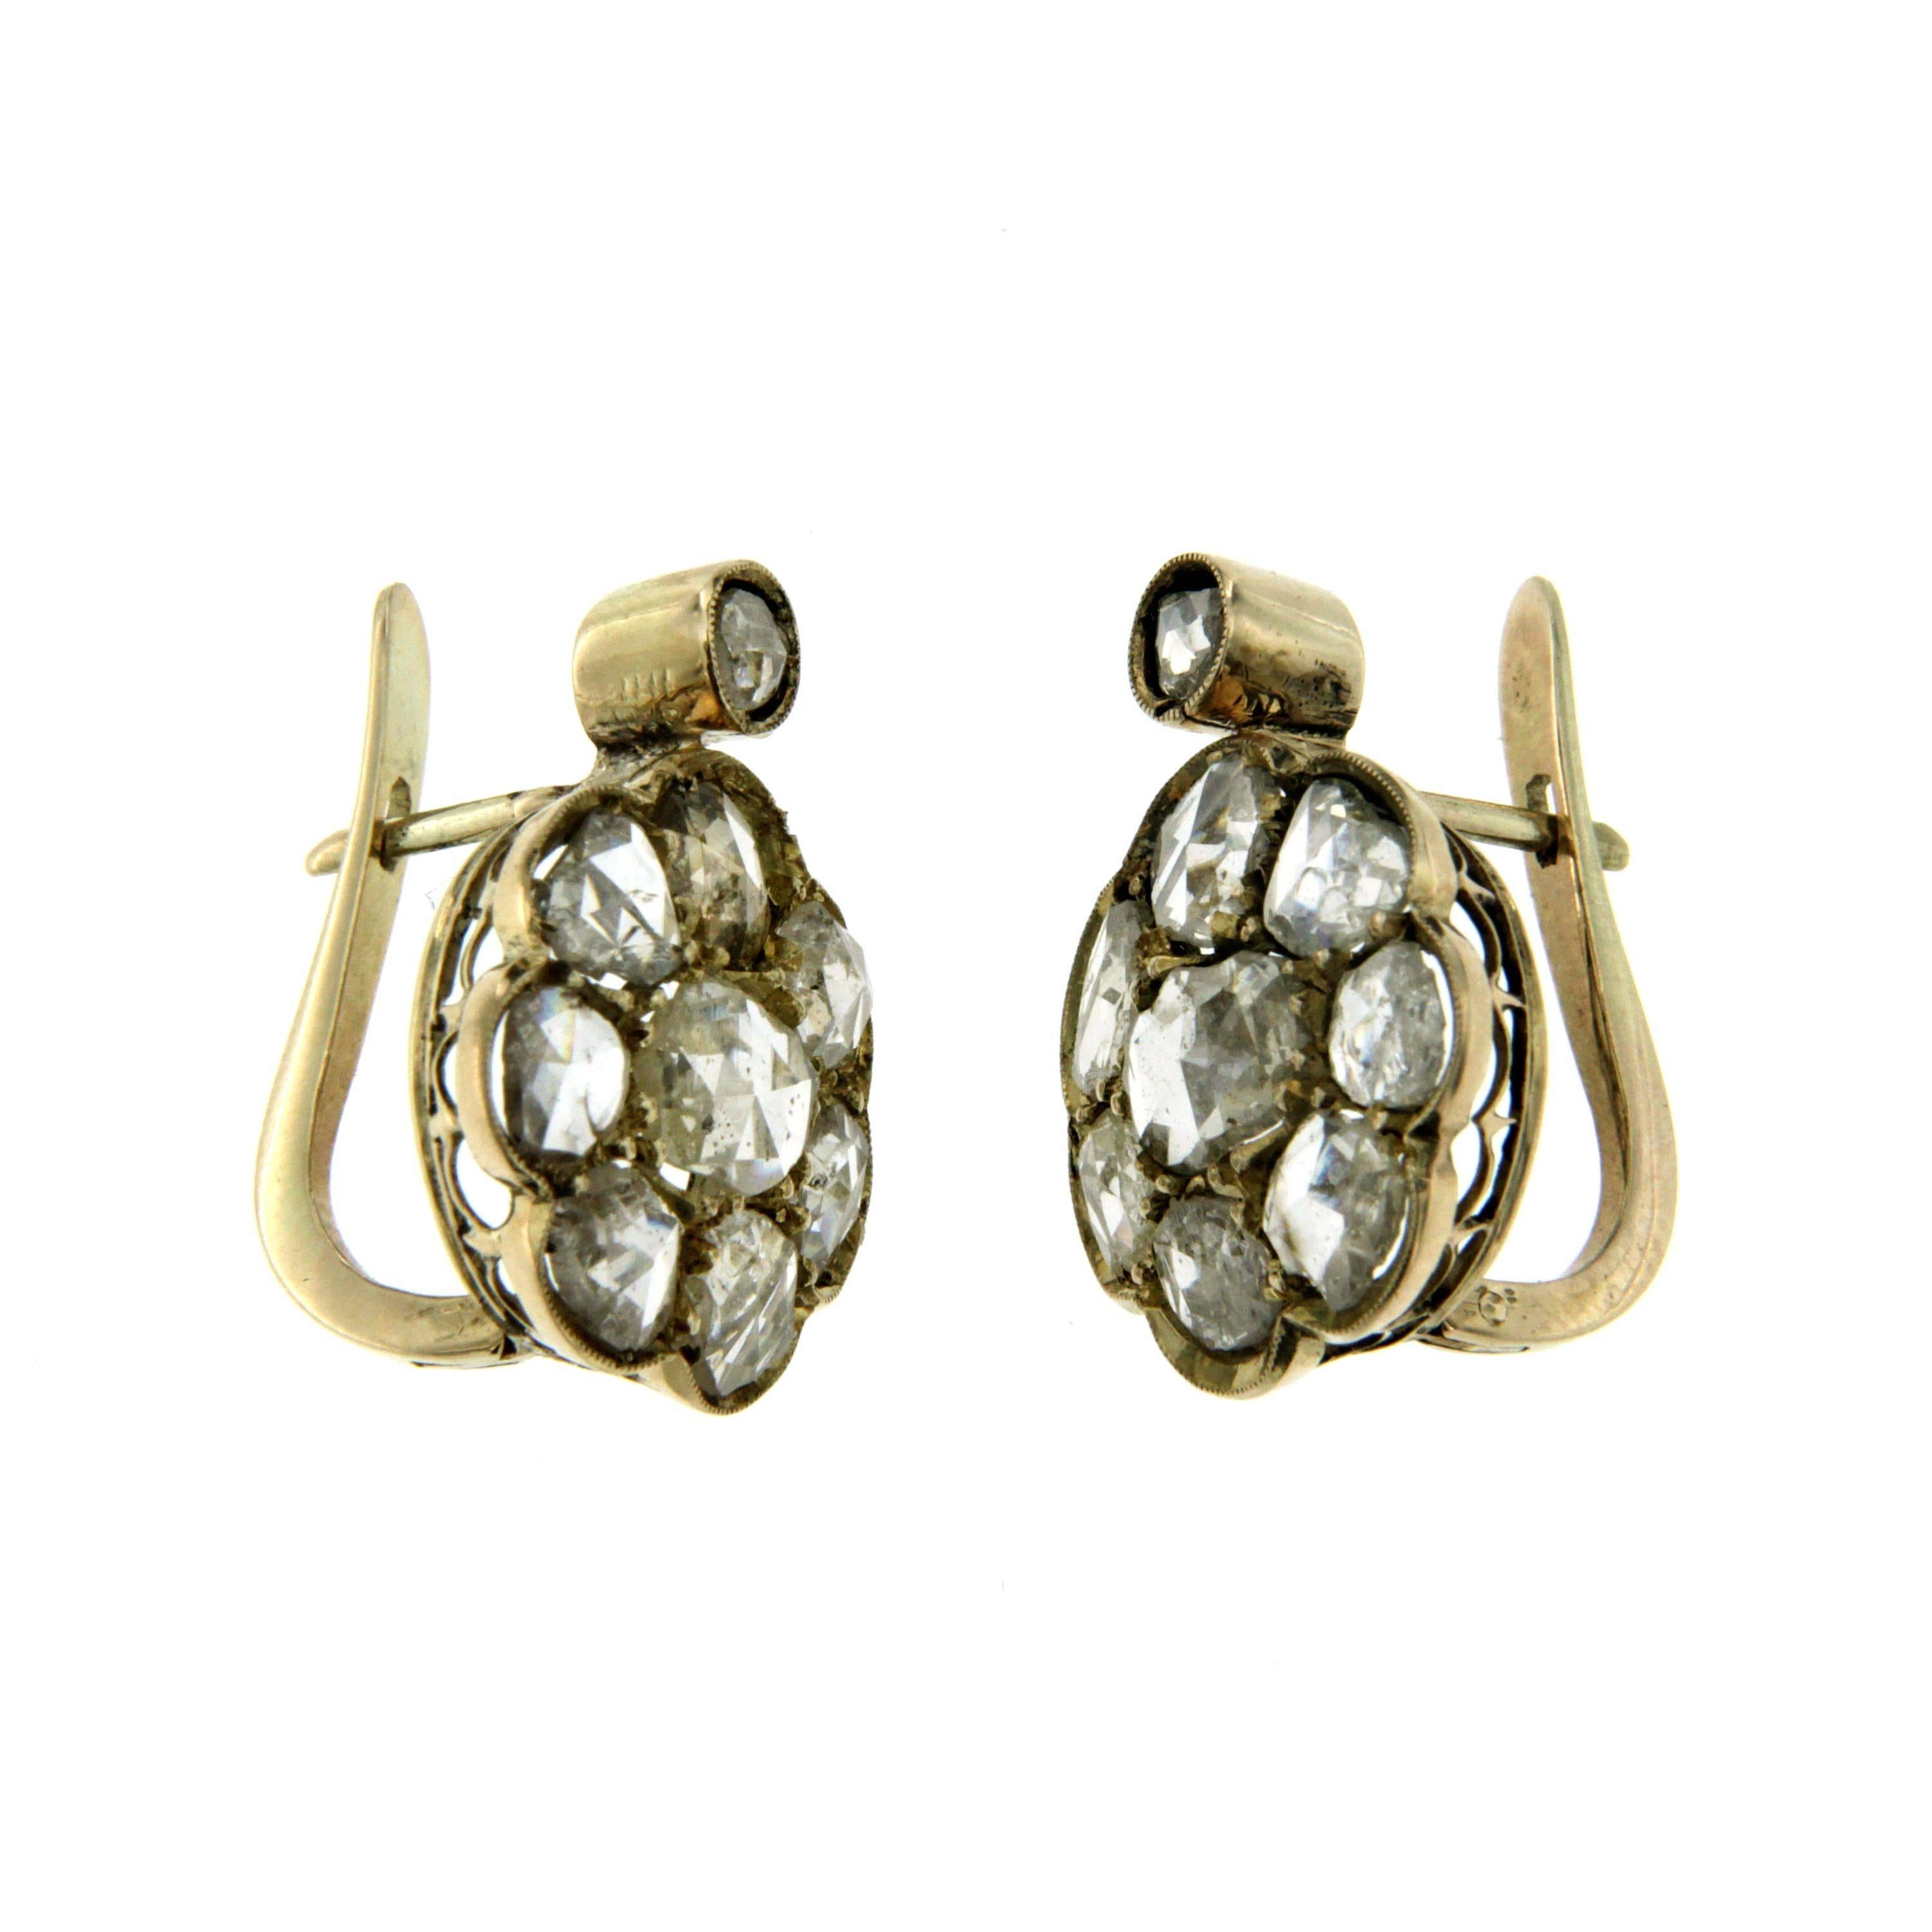 Cluster12k gold earrings authentic from 1800's period.
The Earrings are mounted with approx. 5.00 carat of rose cut Diamonds.

CONDITION: Pre-owned - Excellent 
METAL: 12k Gold 
STONE: Diamond 5.00 total carats 
DESIGN ERA: 1800s
WEIGHT: 5.70 grams